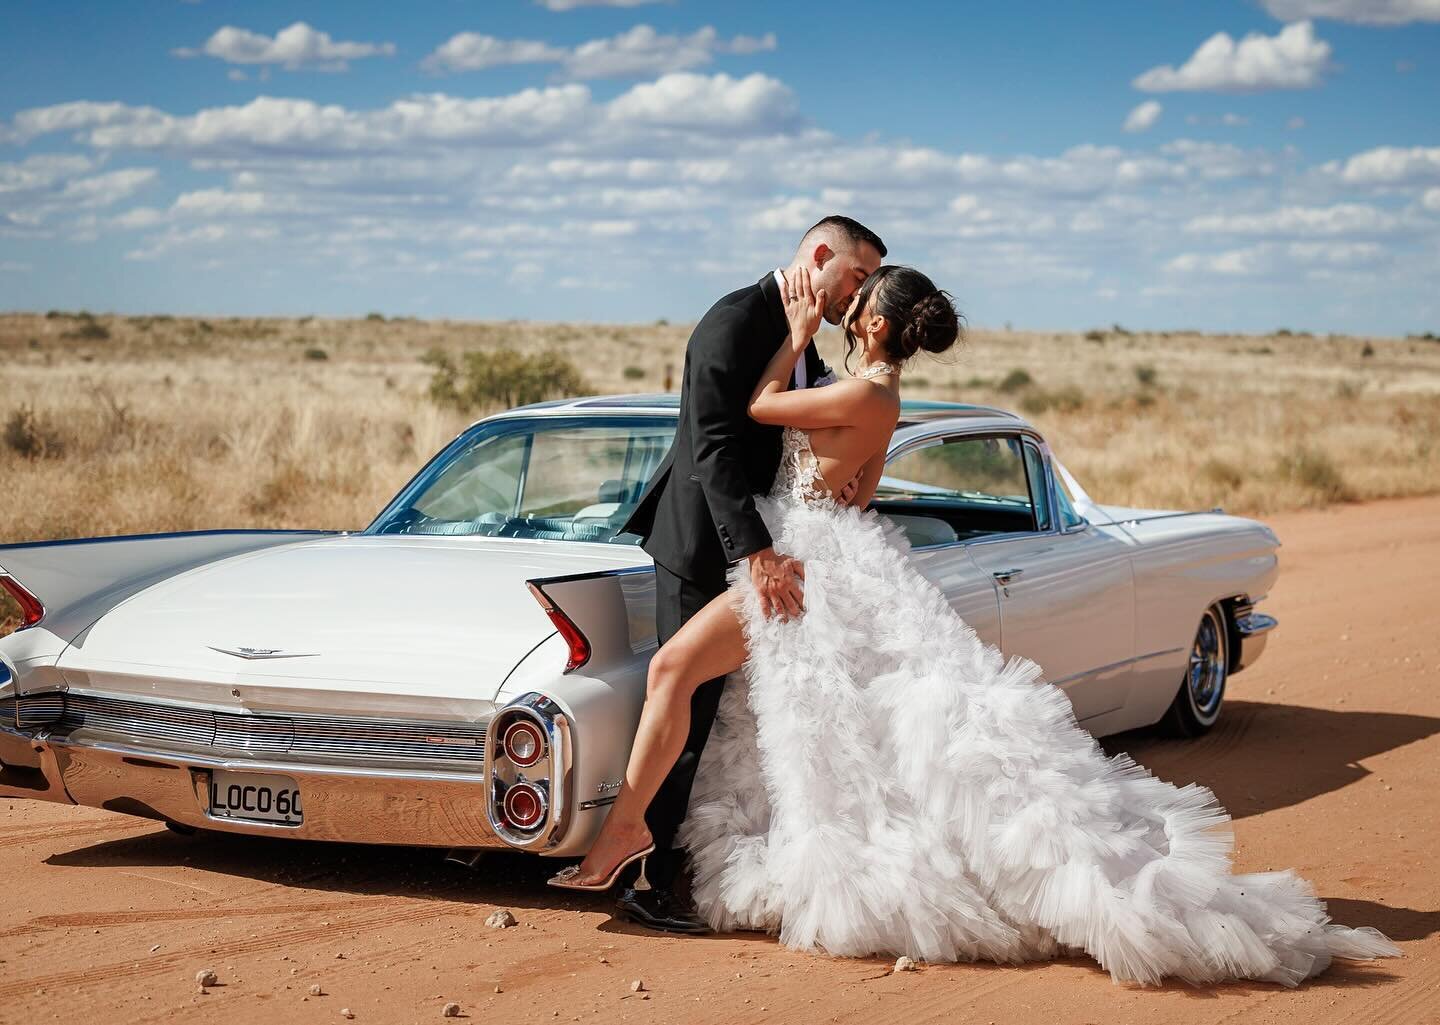 The distinct landscape of Mildura provided an ideal backdrop for the stylish duo, Ashley and Michael 💃

Captured for @georgejohnphotography 

#mjphotography #wedding #weddingday #weddingdress #weddingphotography #bride #brideandgroom #shesaidyes #we